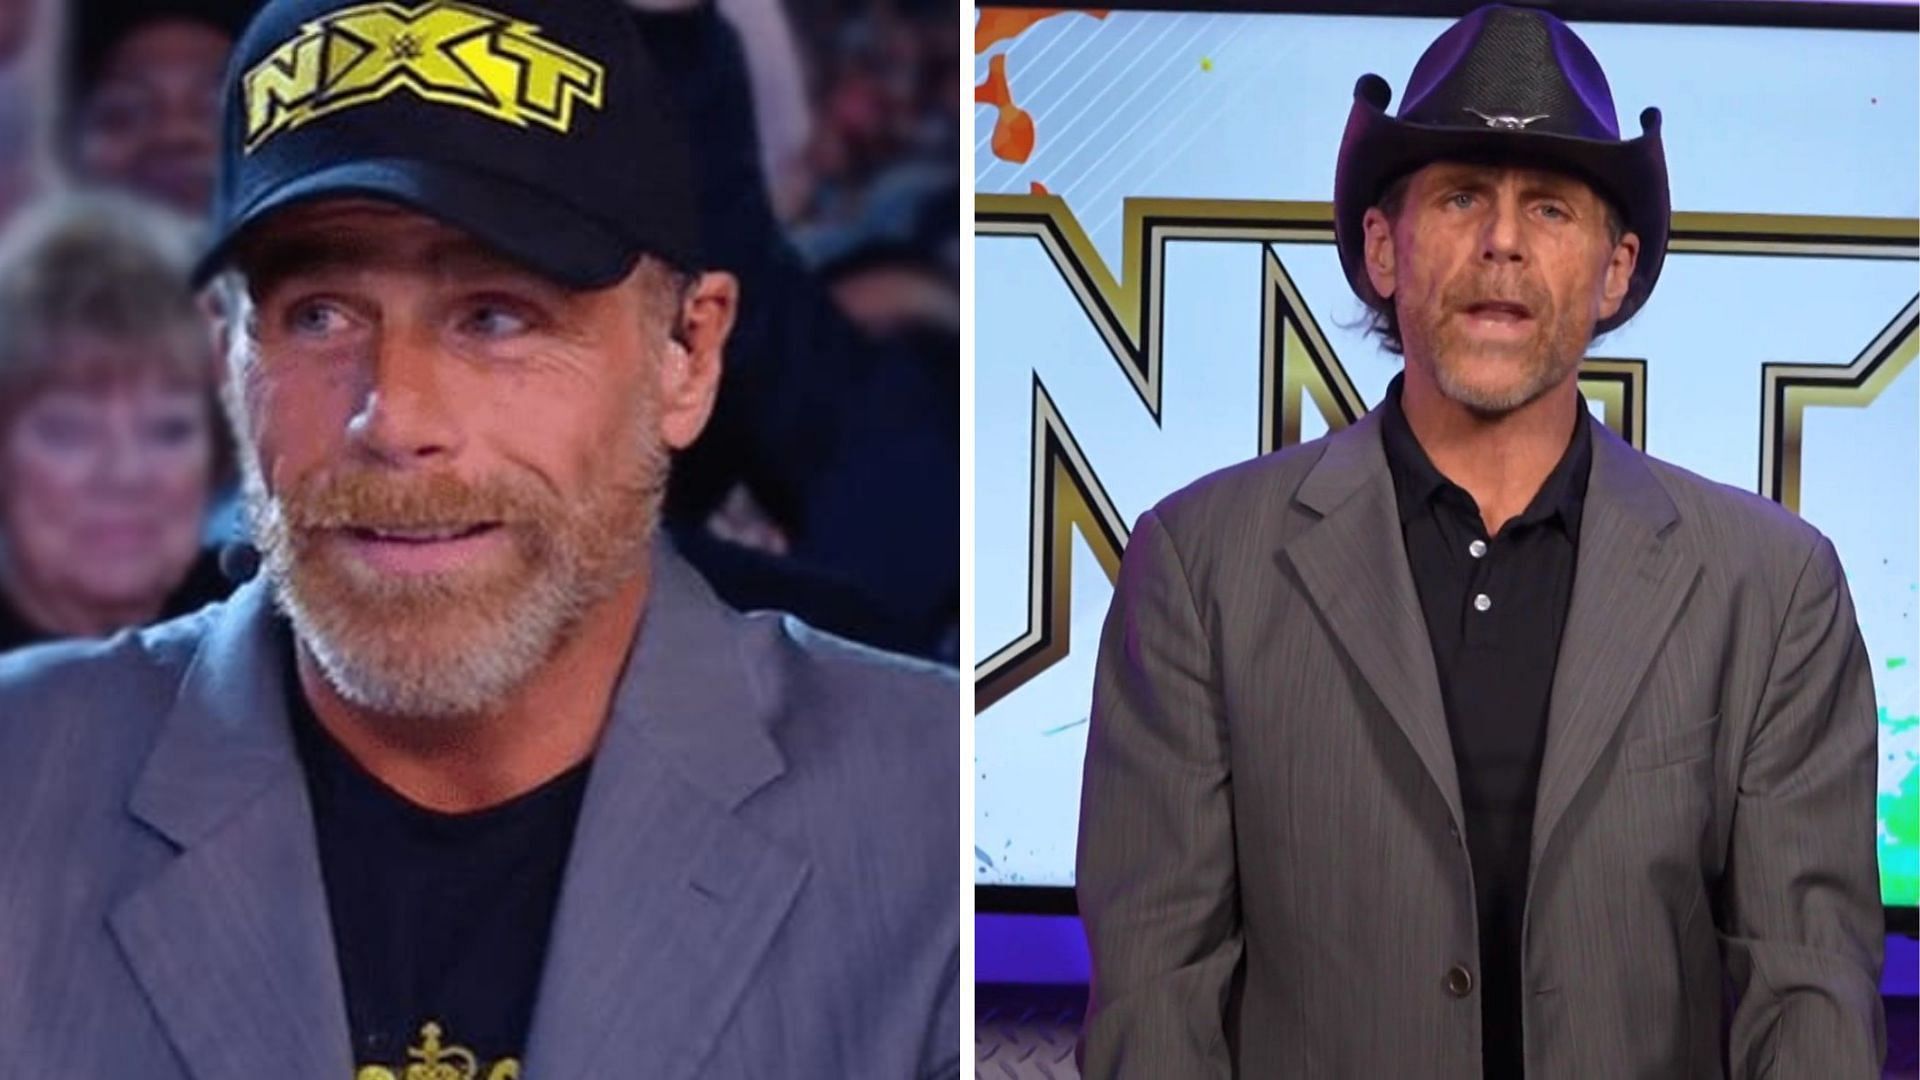 6 potential announcements Shawn Michaels could make on WWE NXT